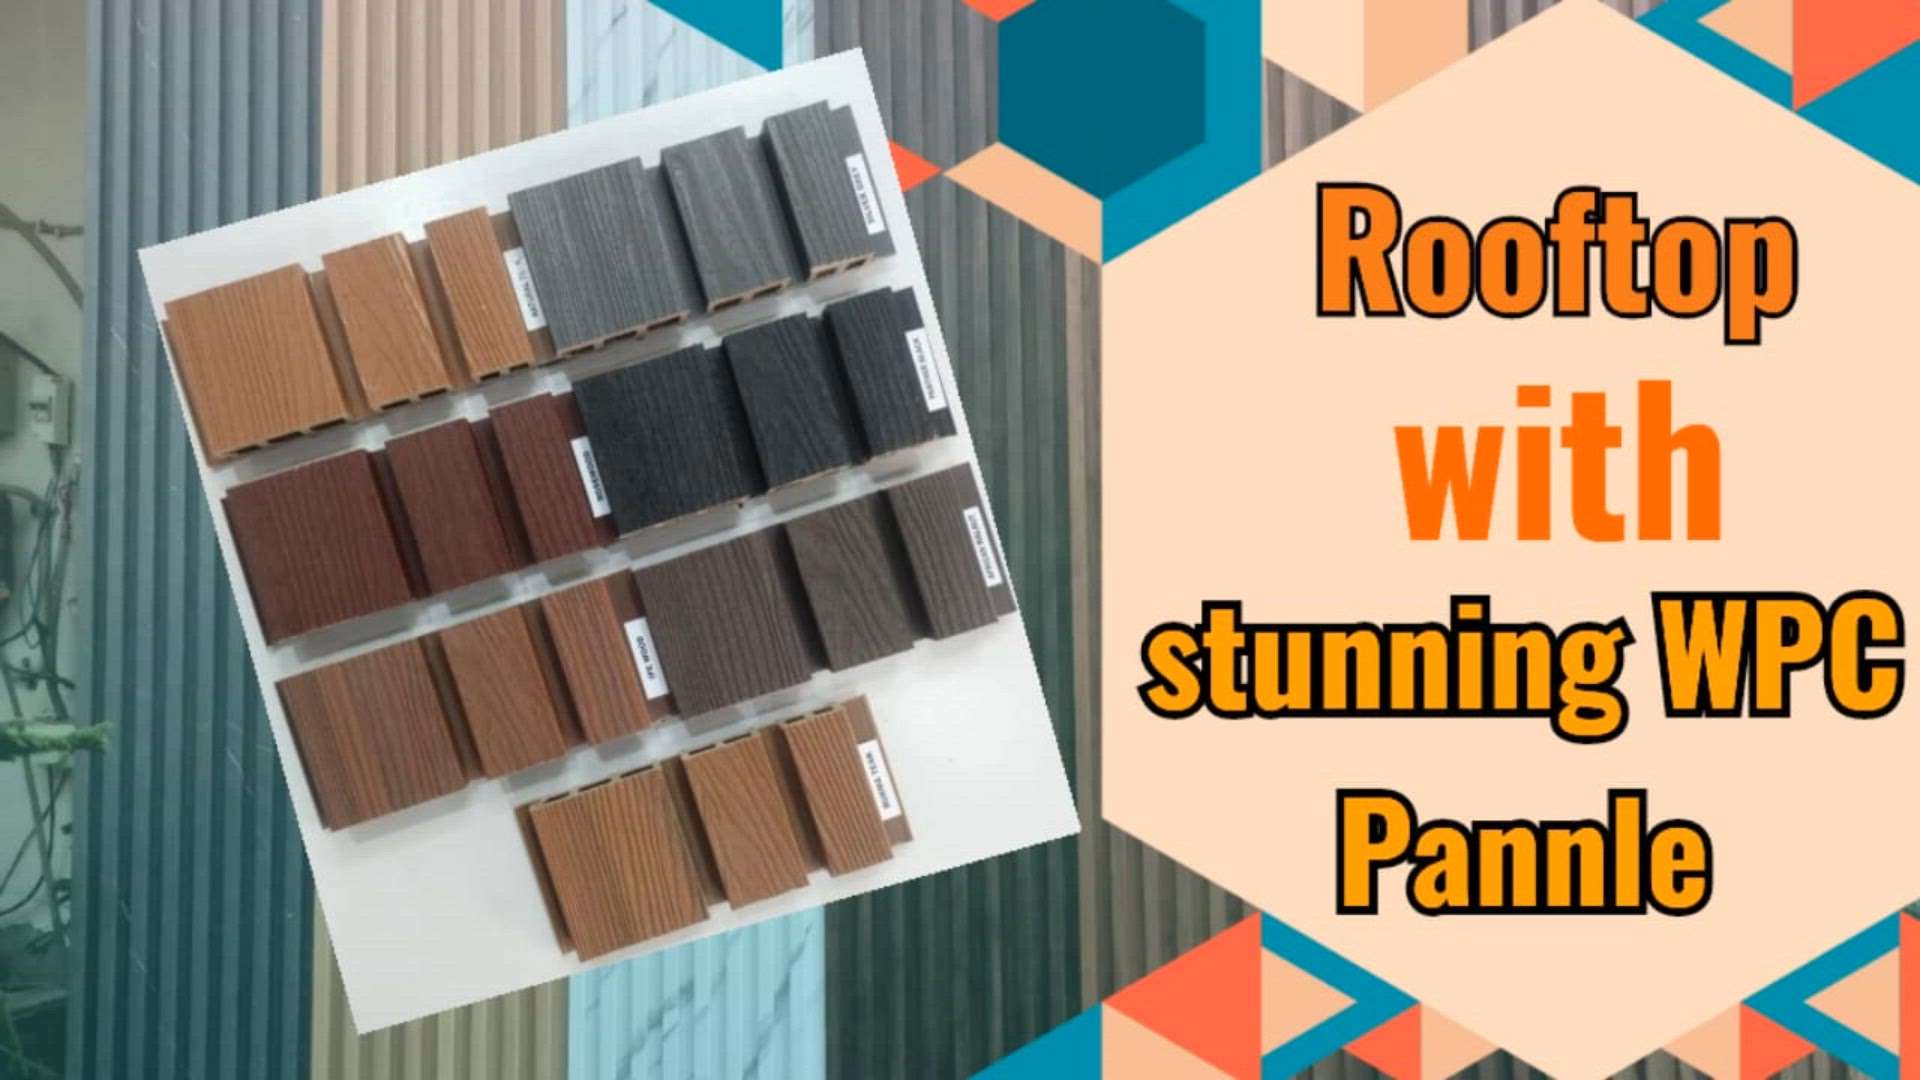 book your site call on 7011392986
 #wpclouvers  #wpcwork  #wpcpanel #wpcexterior  #wpc  #RoofingIdeas  #RoofingDesigns  #FlatRoof  #FlatRoofHouse  #RooftopGarden  #RoofingIdeas  #rooftop  #rooftops  #rooftopsolution  #rooftopgoals